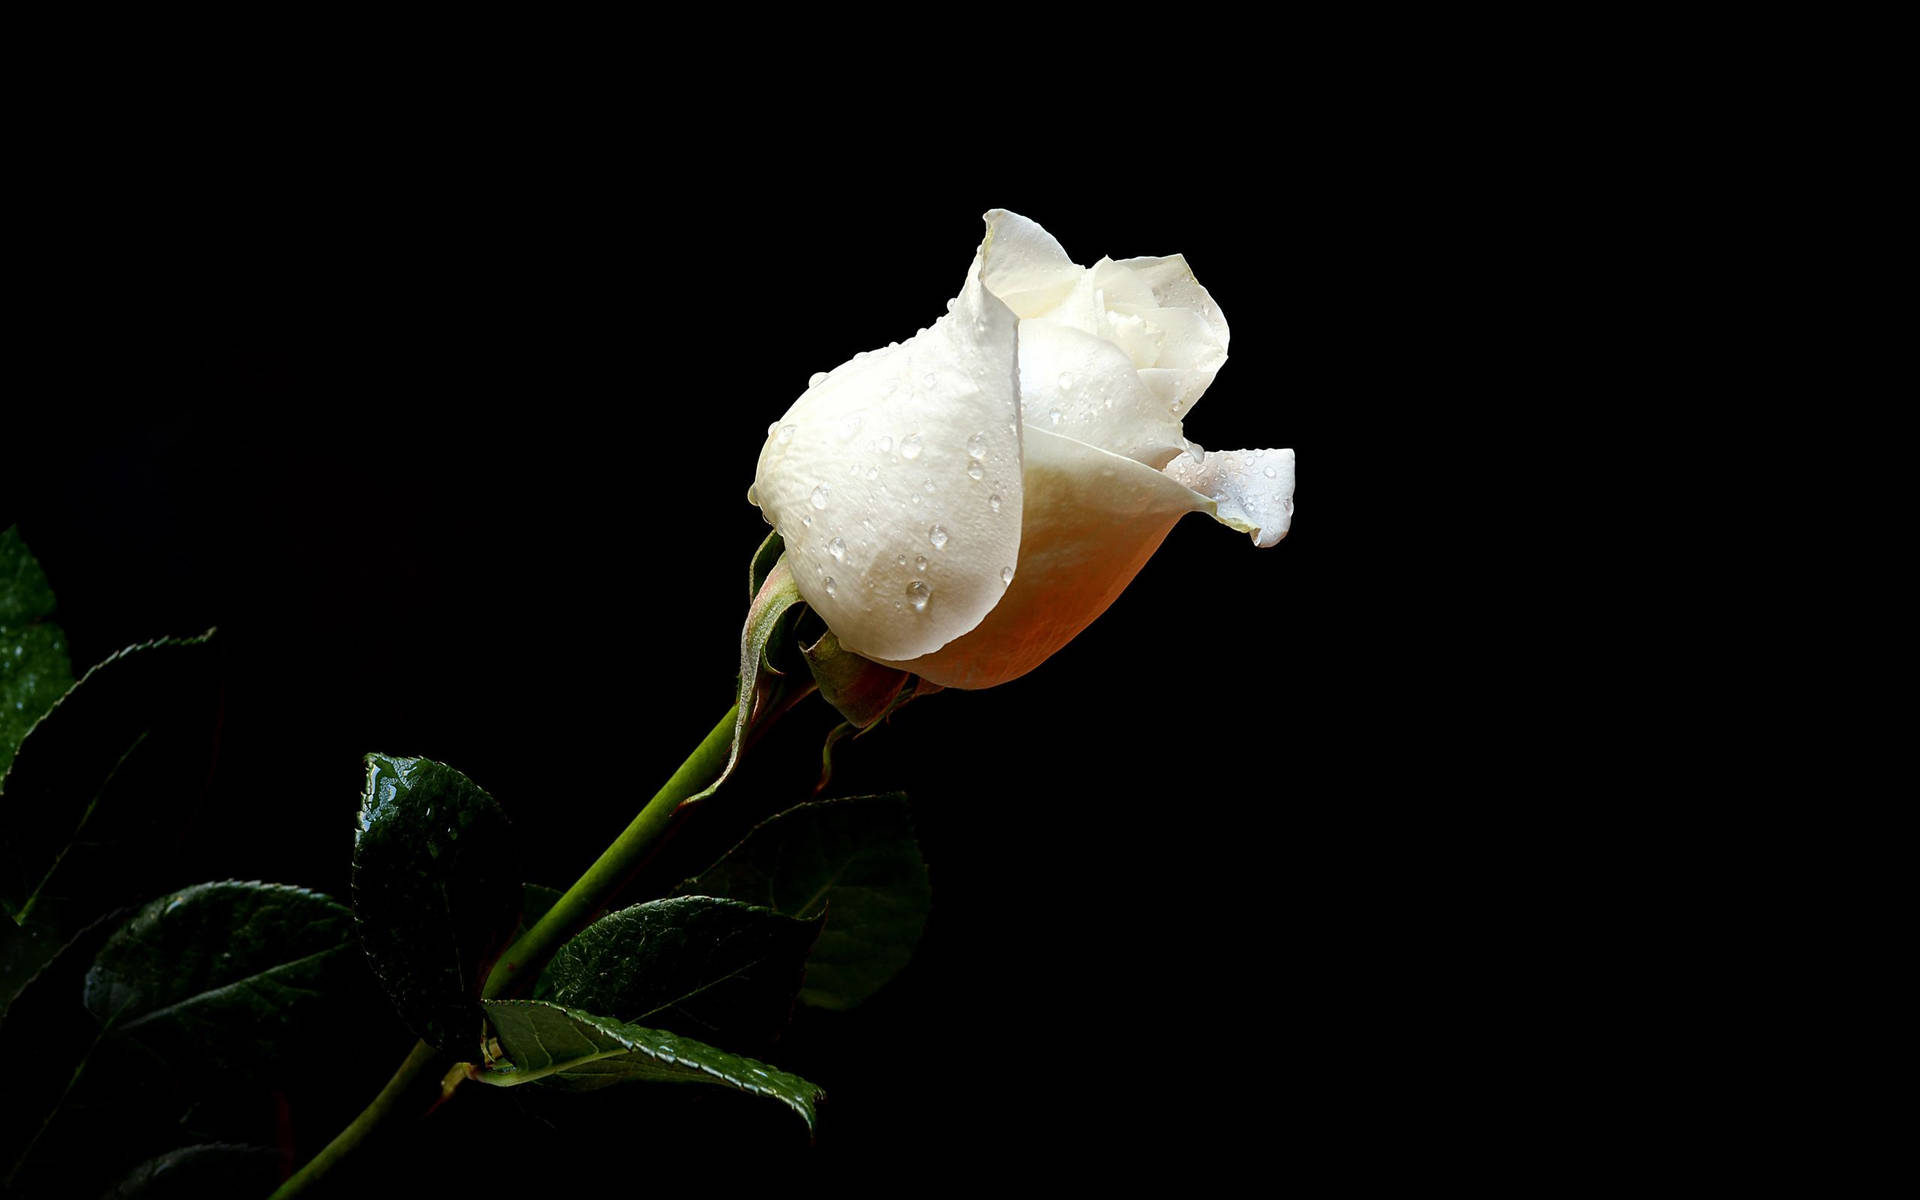 Damped White Rose And Black Background Wallpaper